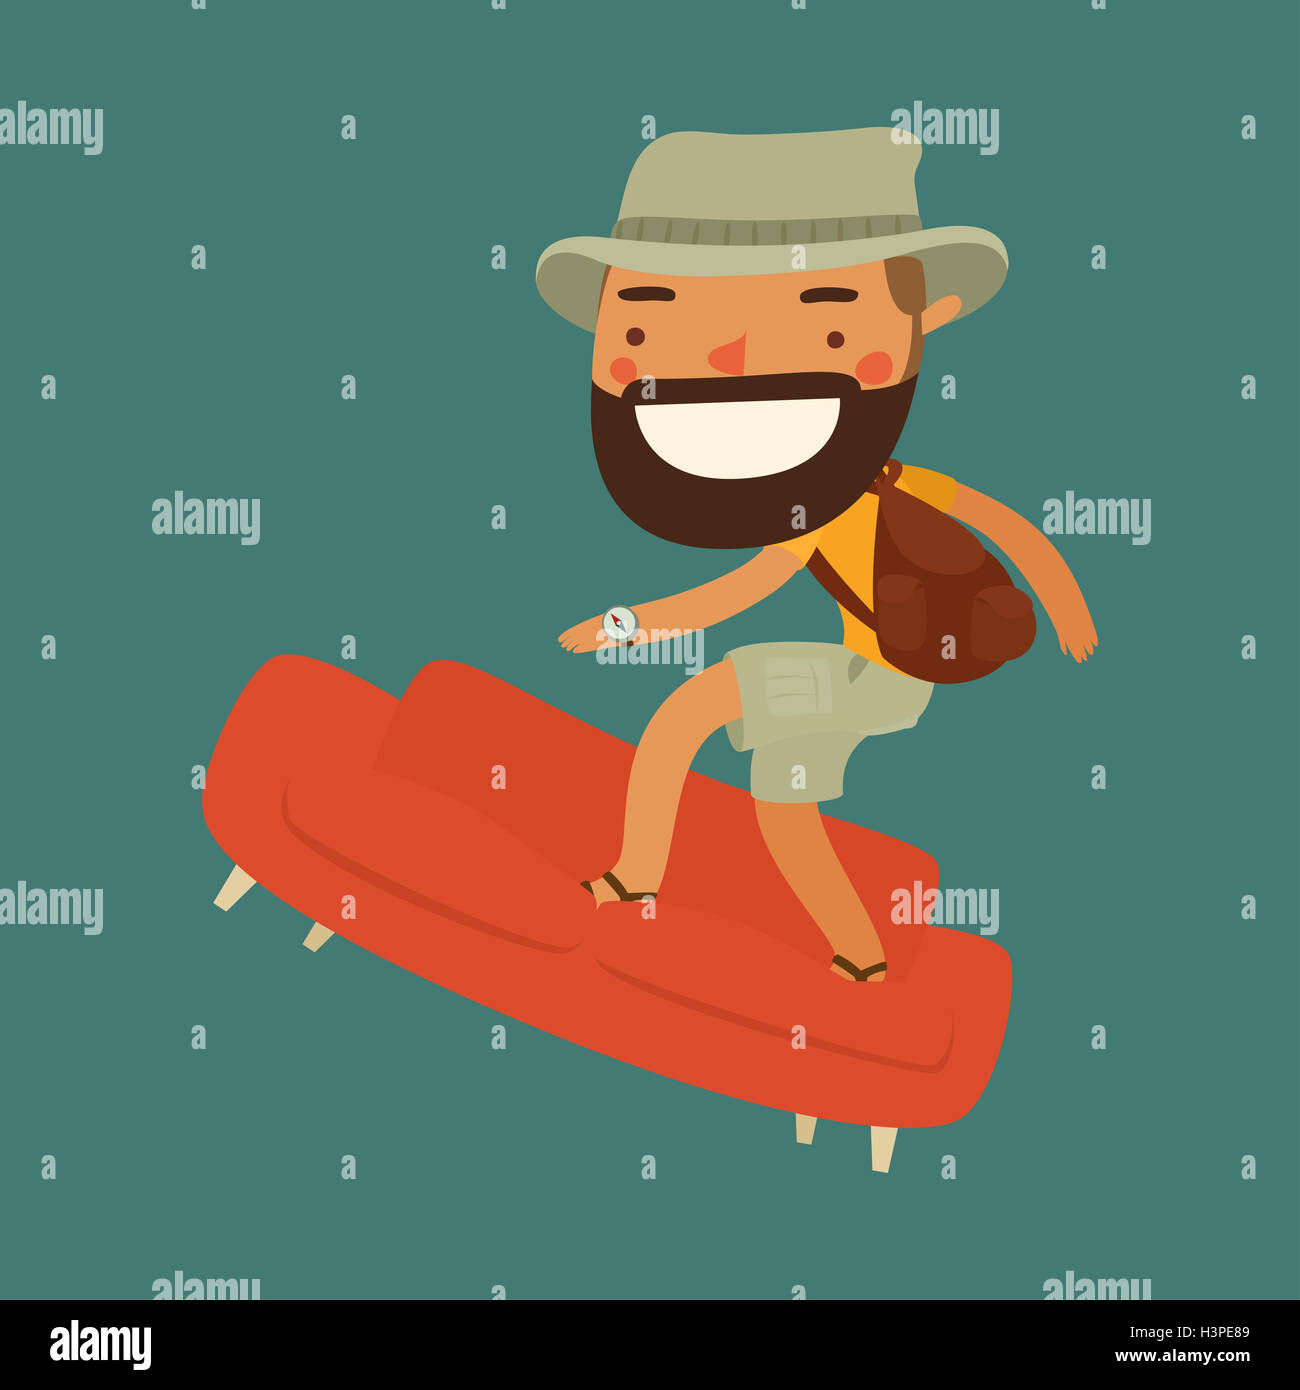 couchsurfing character. traveler character. vector illustration Stock Photo